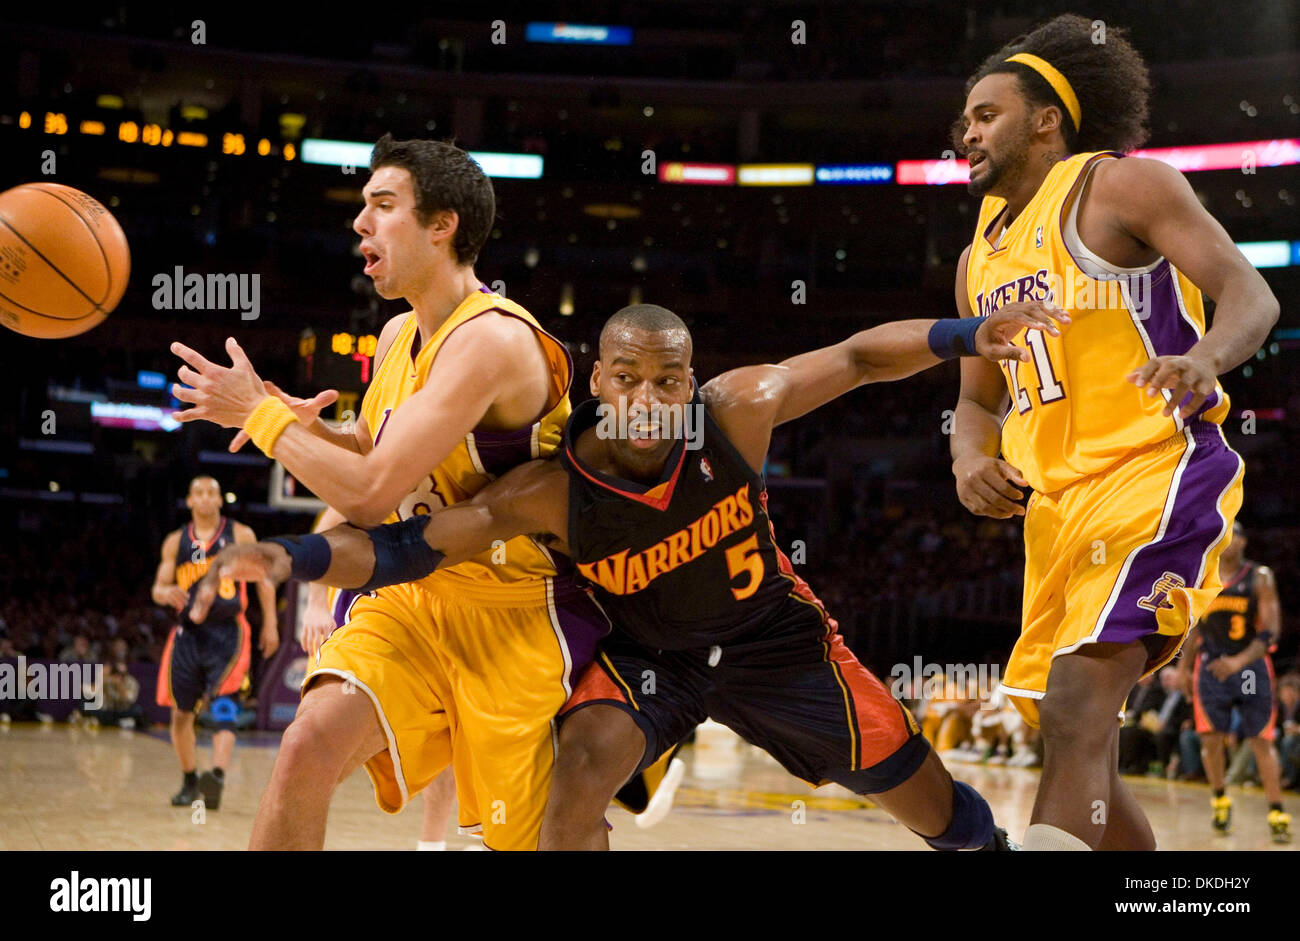 Jan 22, 2007; Los Angeles, CA, USA; Golden State Warriors' (C) BARON DAVIS goes for a loose ball against Los Angeles Lakers' Sasha Vujacic  (R) during the first half of their game at the Staples Cente in Los Angeles. Mandatory Credit: Photo by Armando Arorizo/ZUMA Press. (©) Copyright 2007 by Armando Arorizo Stock Photo